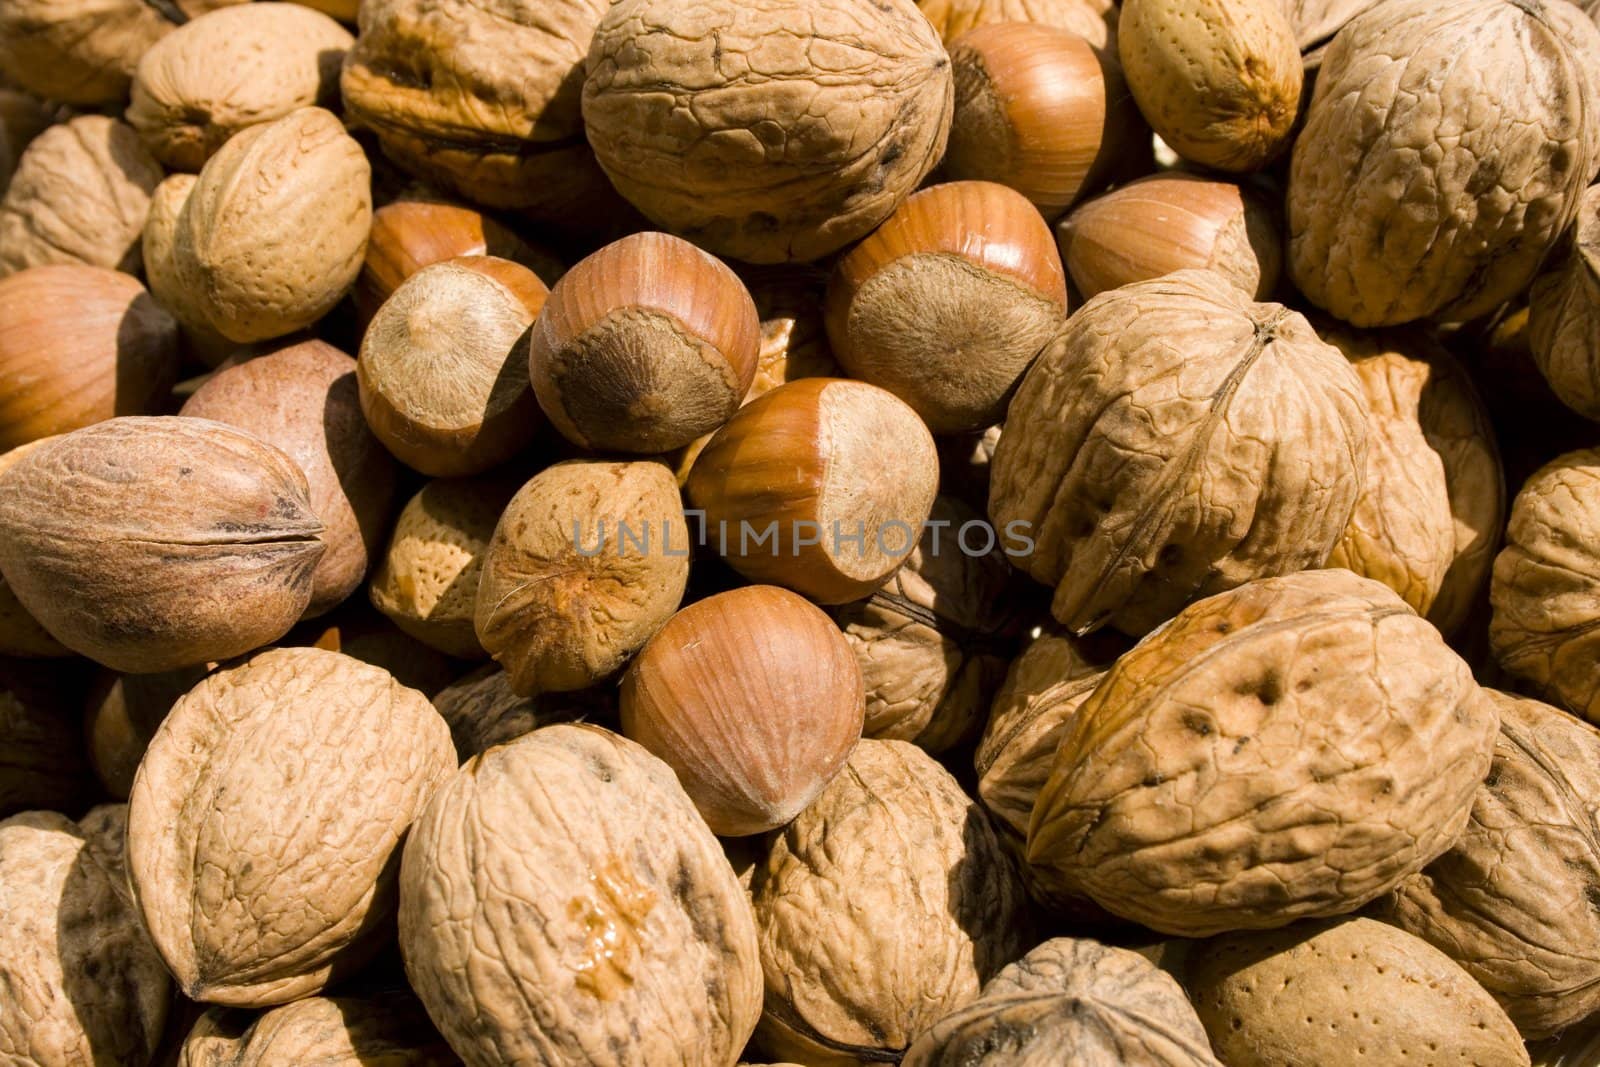 A close-up of a basket of various nuts.